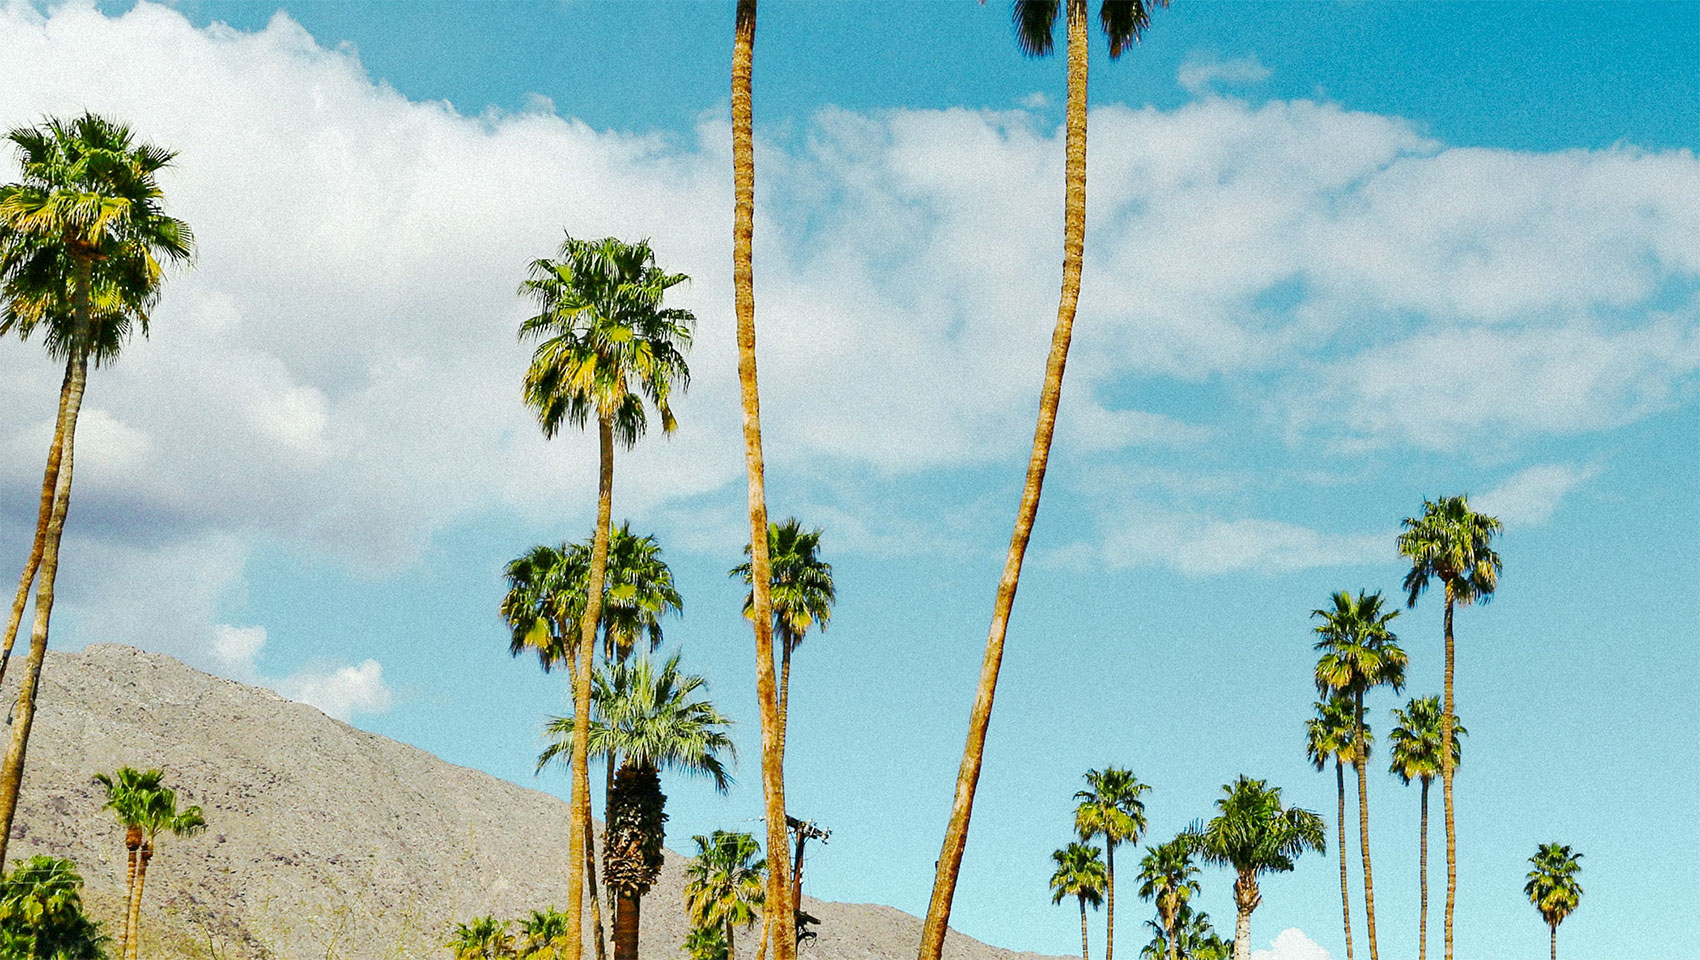 mountain and palm trees view